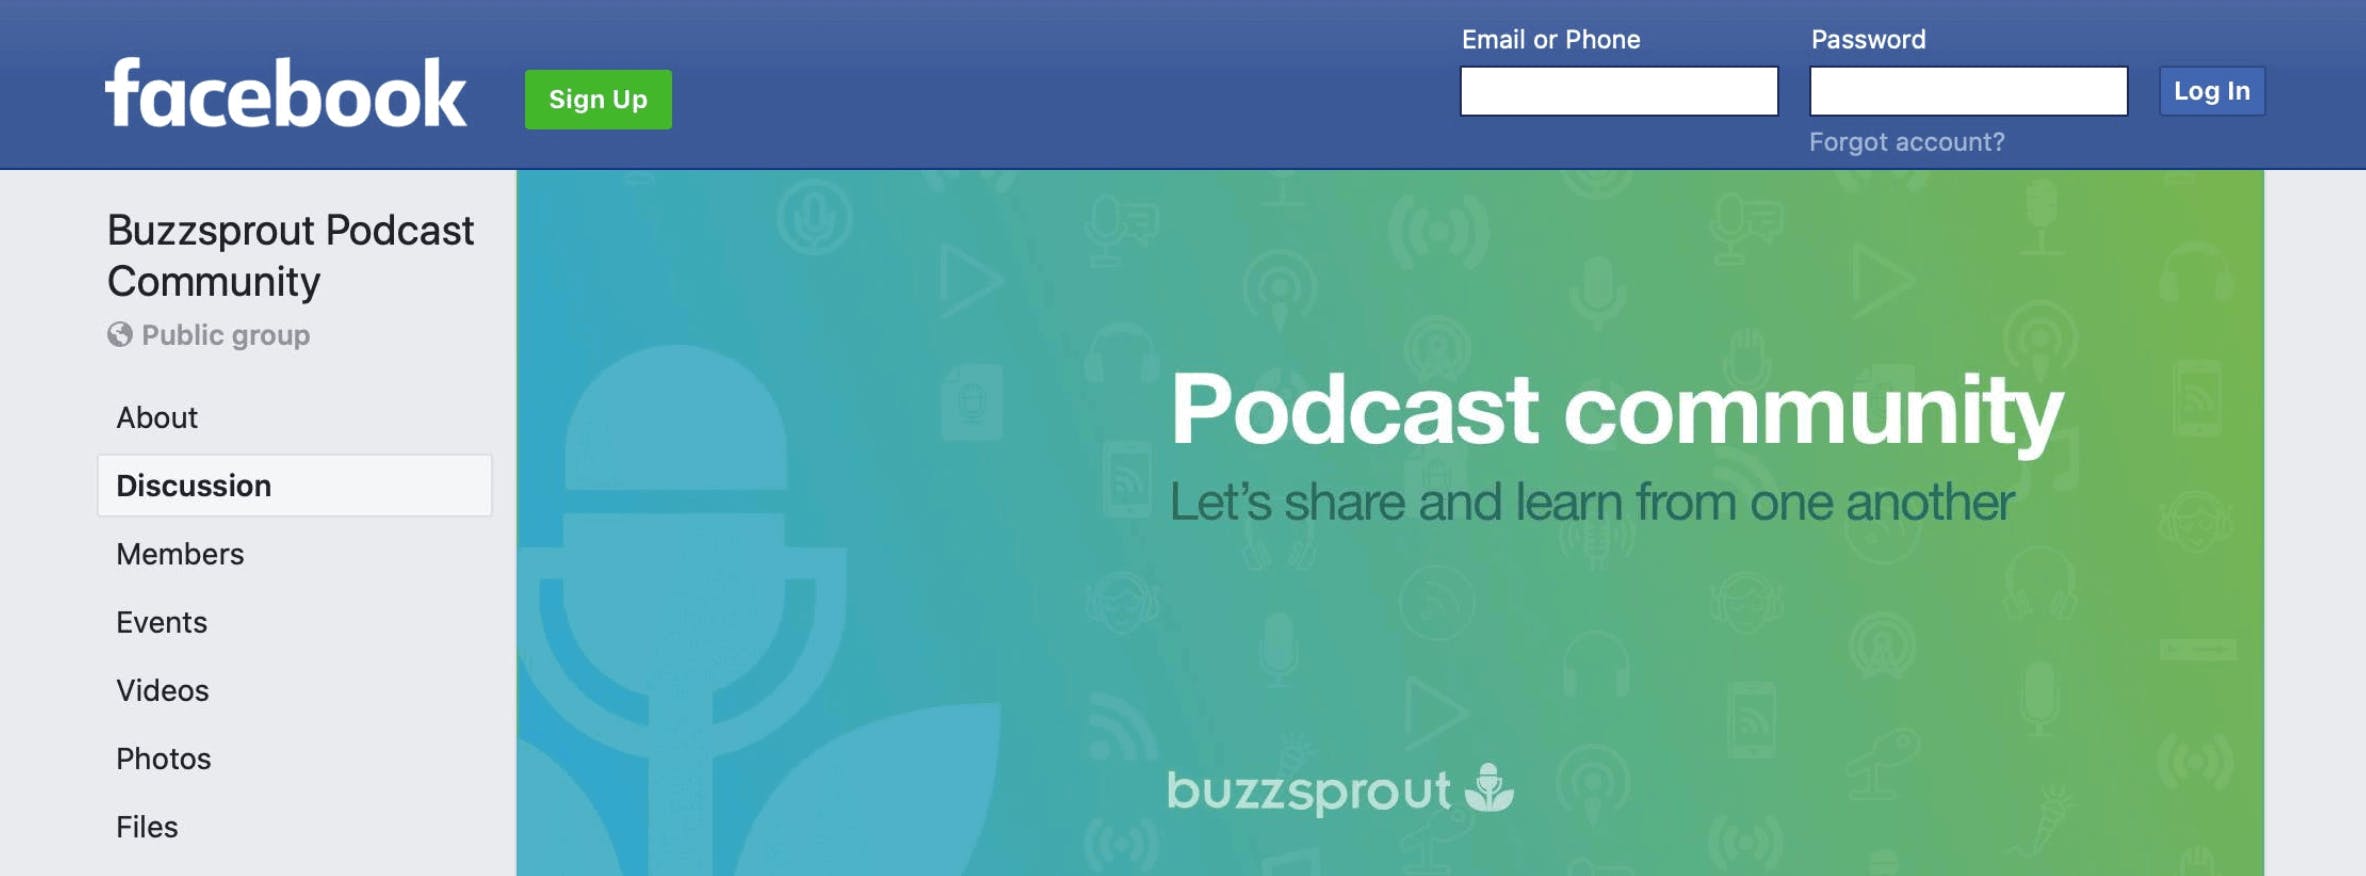 Buzzsprout Podcast Community Facebook page